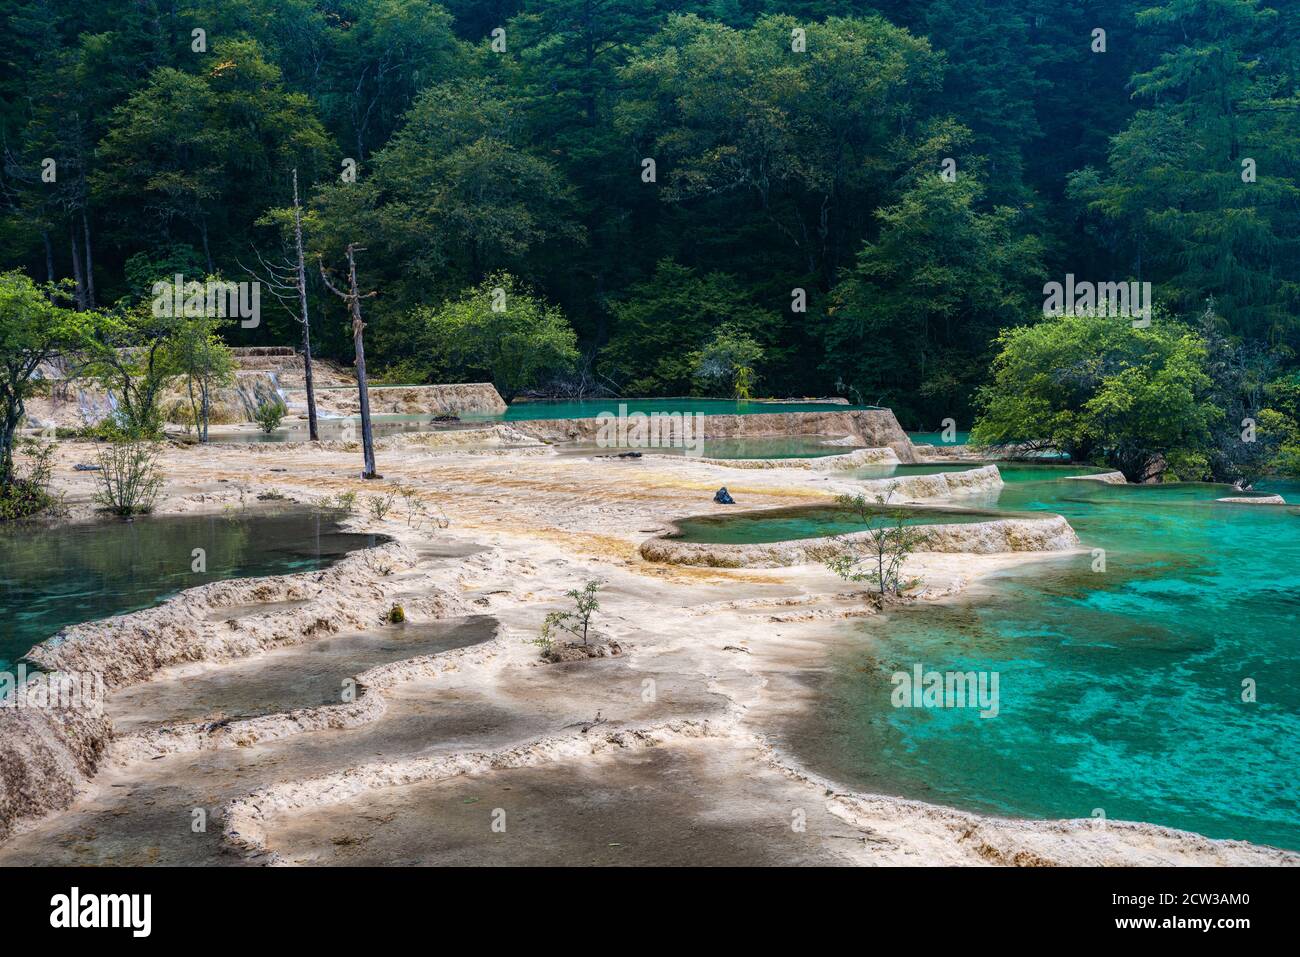 The turquoise color pools in Huanglong Valley, in Sichuan province, China. Stock Photo